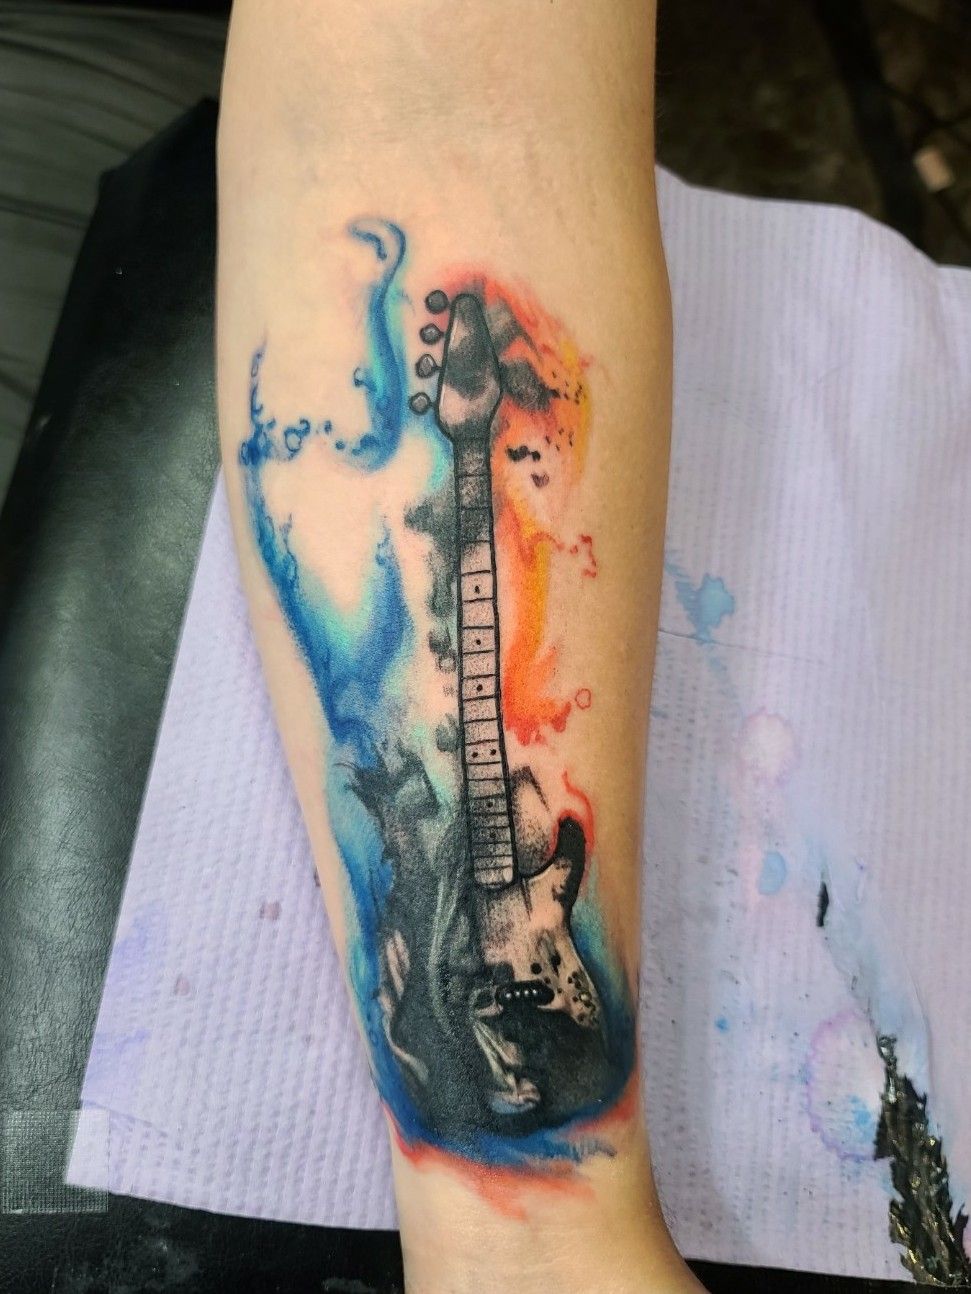 35 Awesome Music Tattoos  For Creative Juice  Music tattoos Music tattoo  designs Tattoos